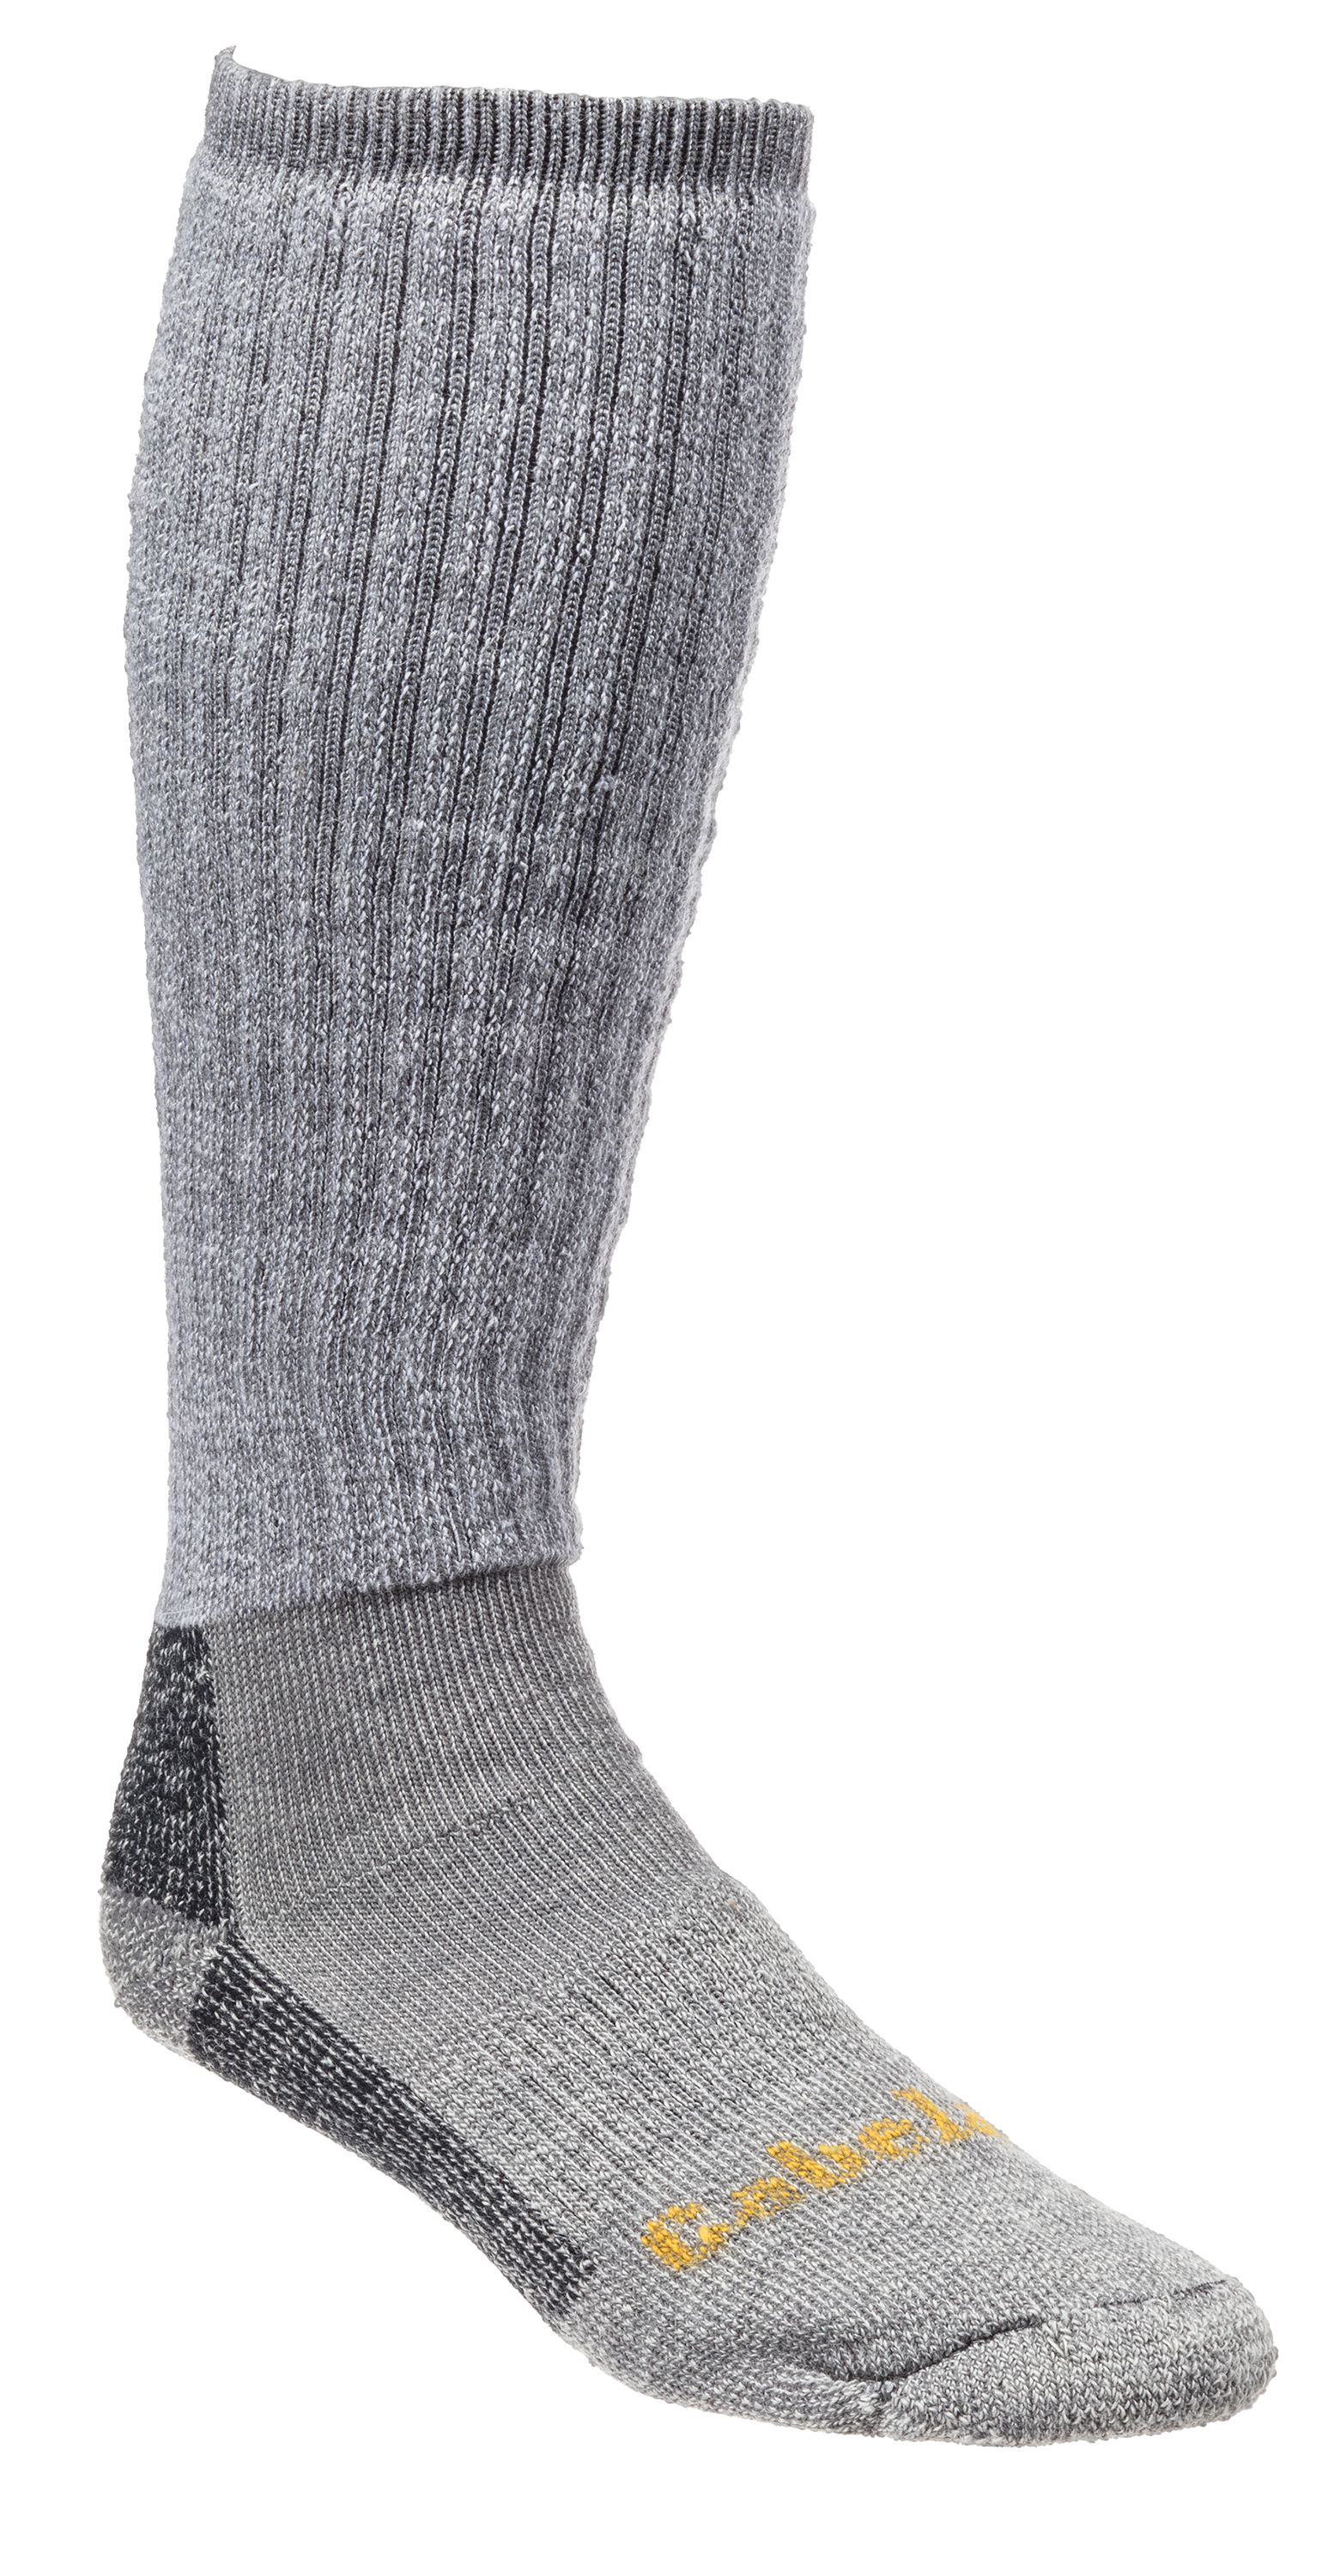 ICE Extreme Cold Territory Sock - Military Boot Sock - Covert